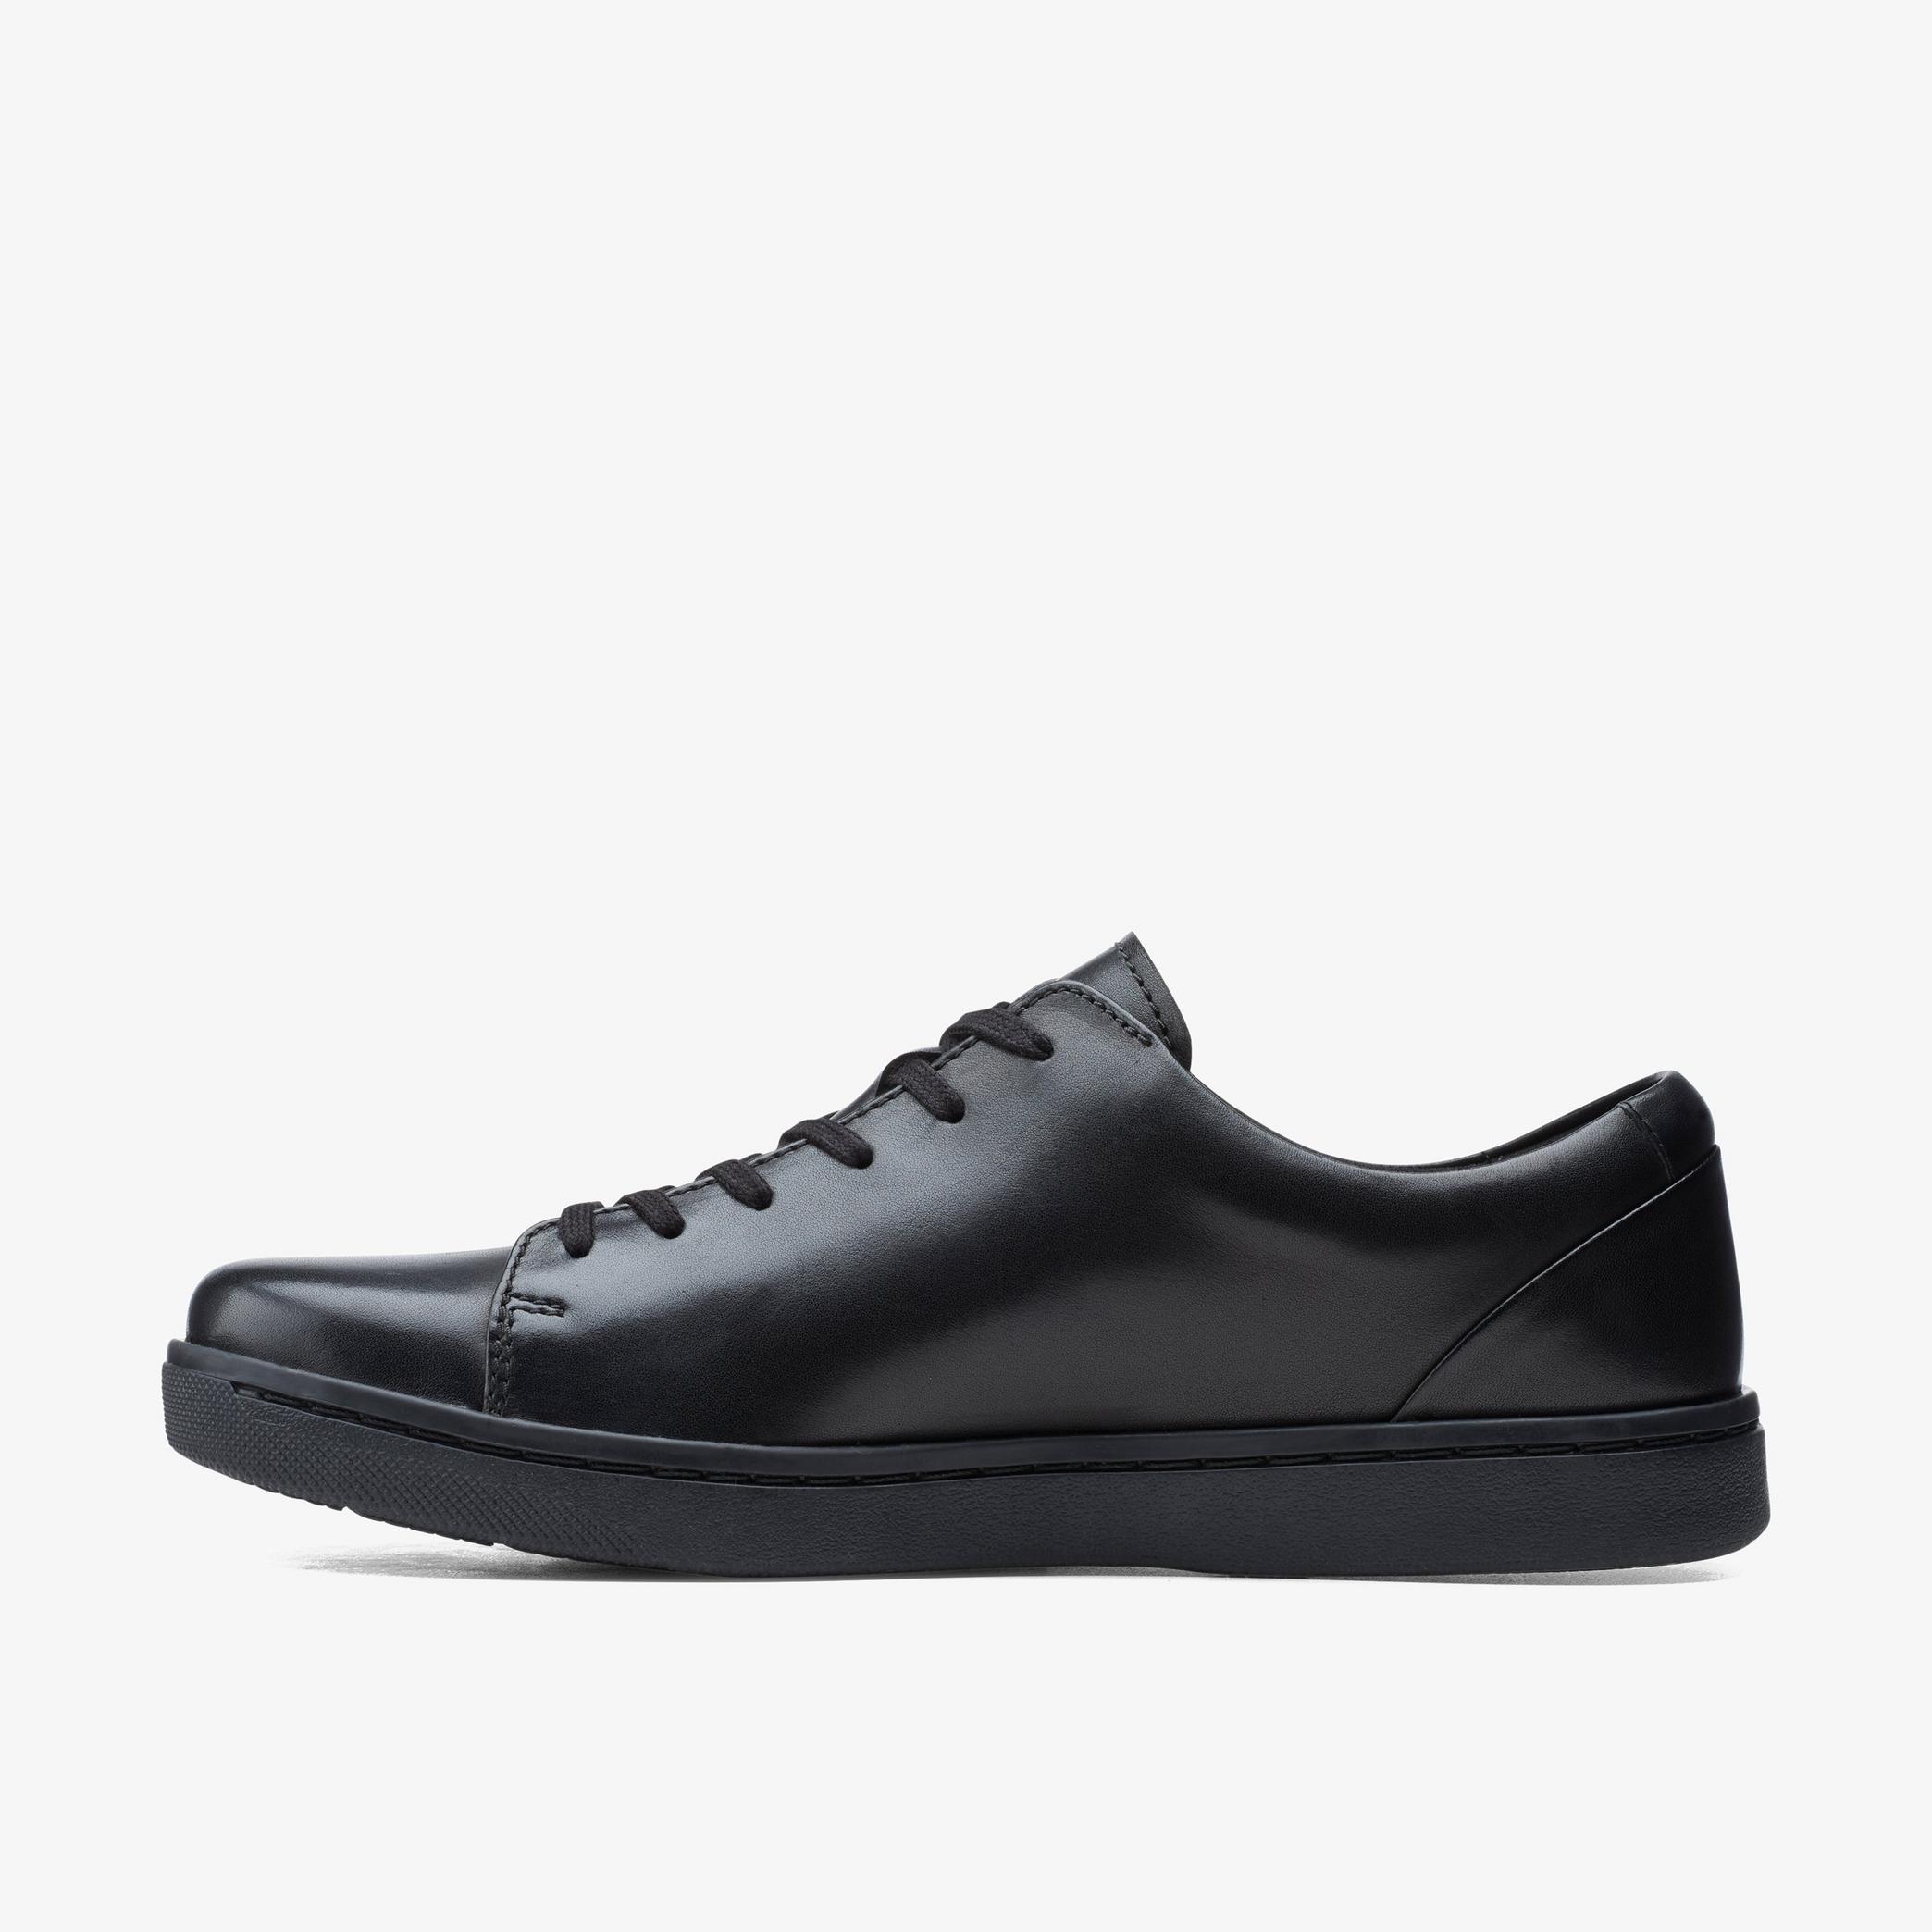 Kitna Lo Black Leather Shoes, view 2 of 6